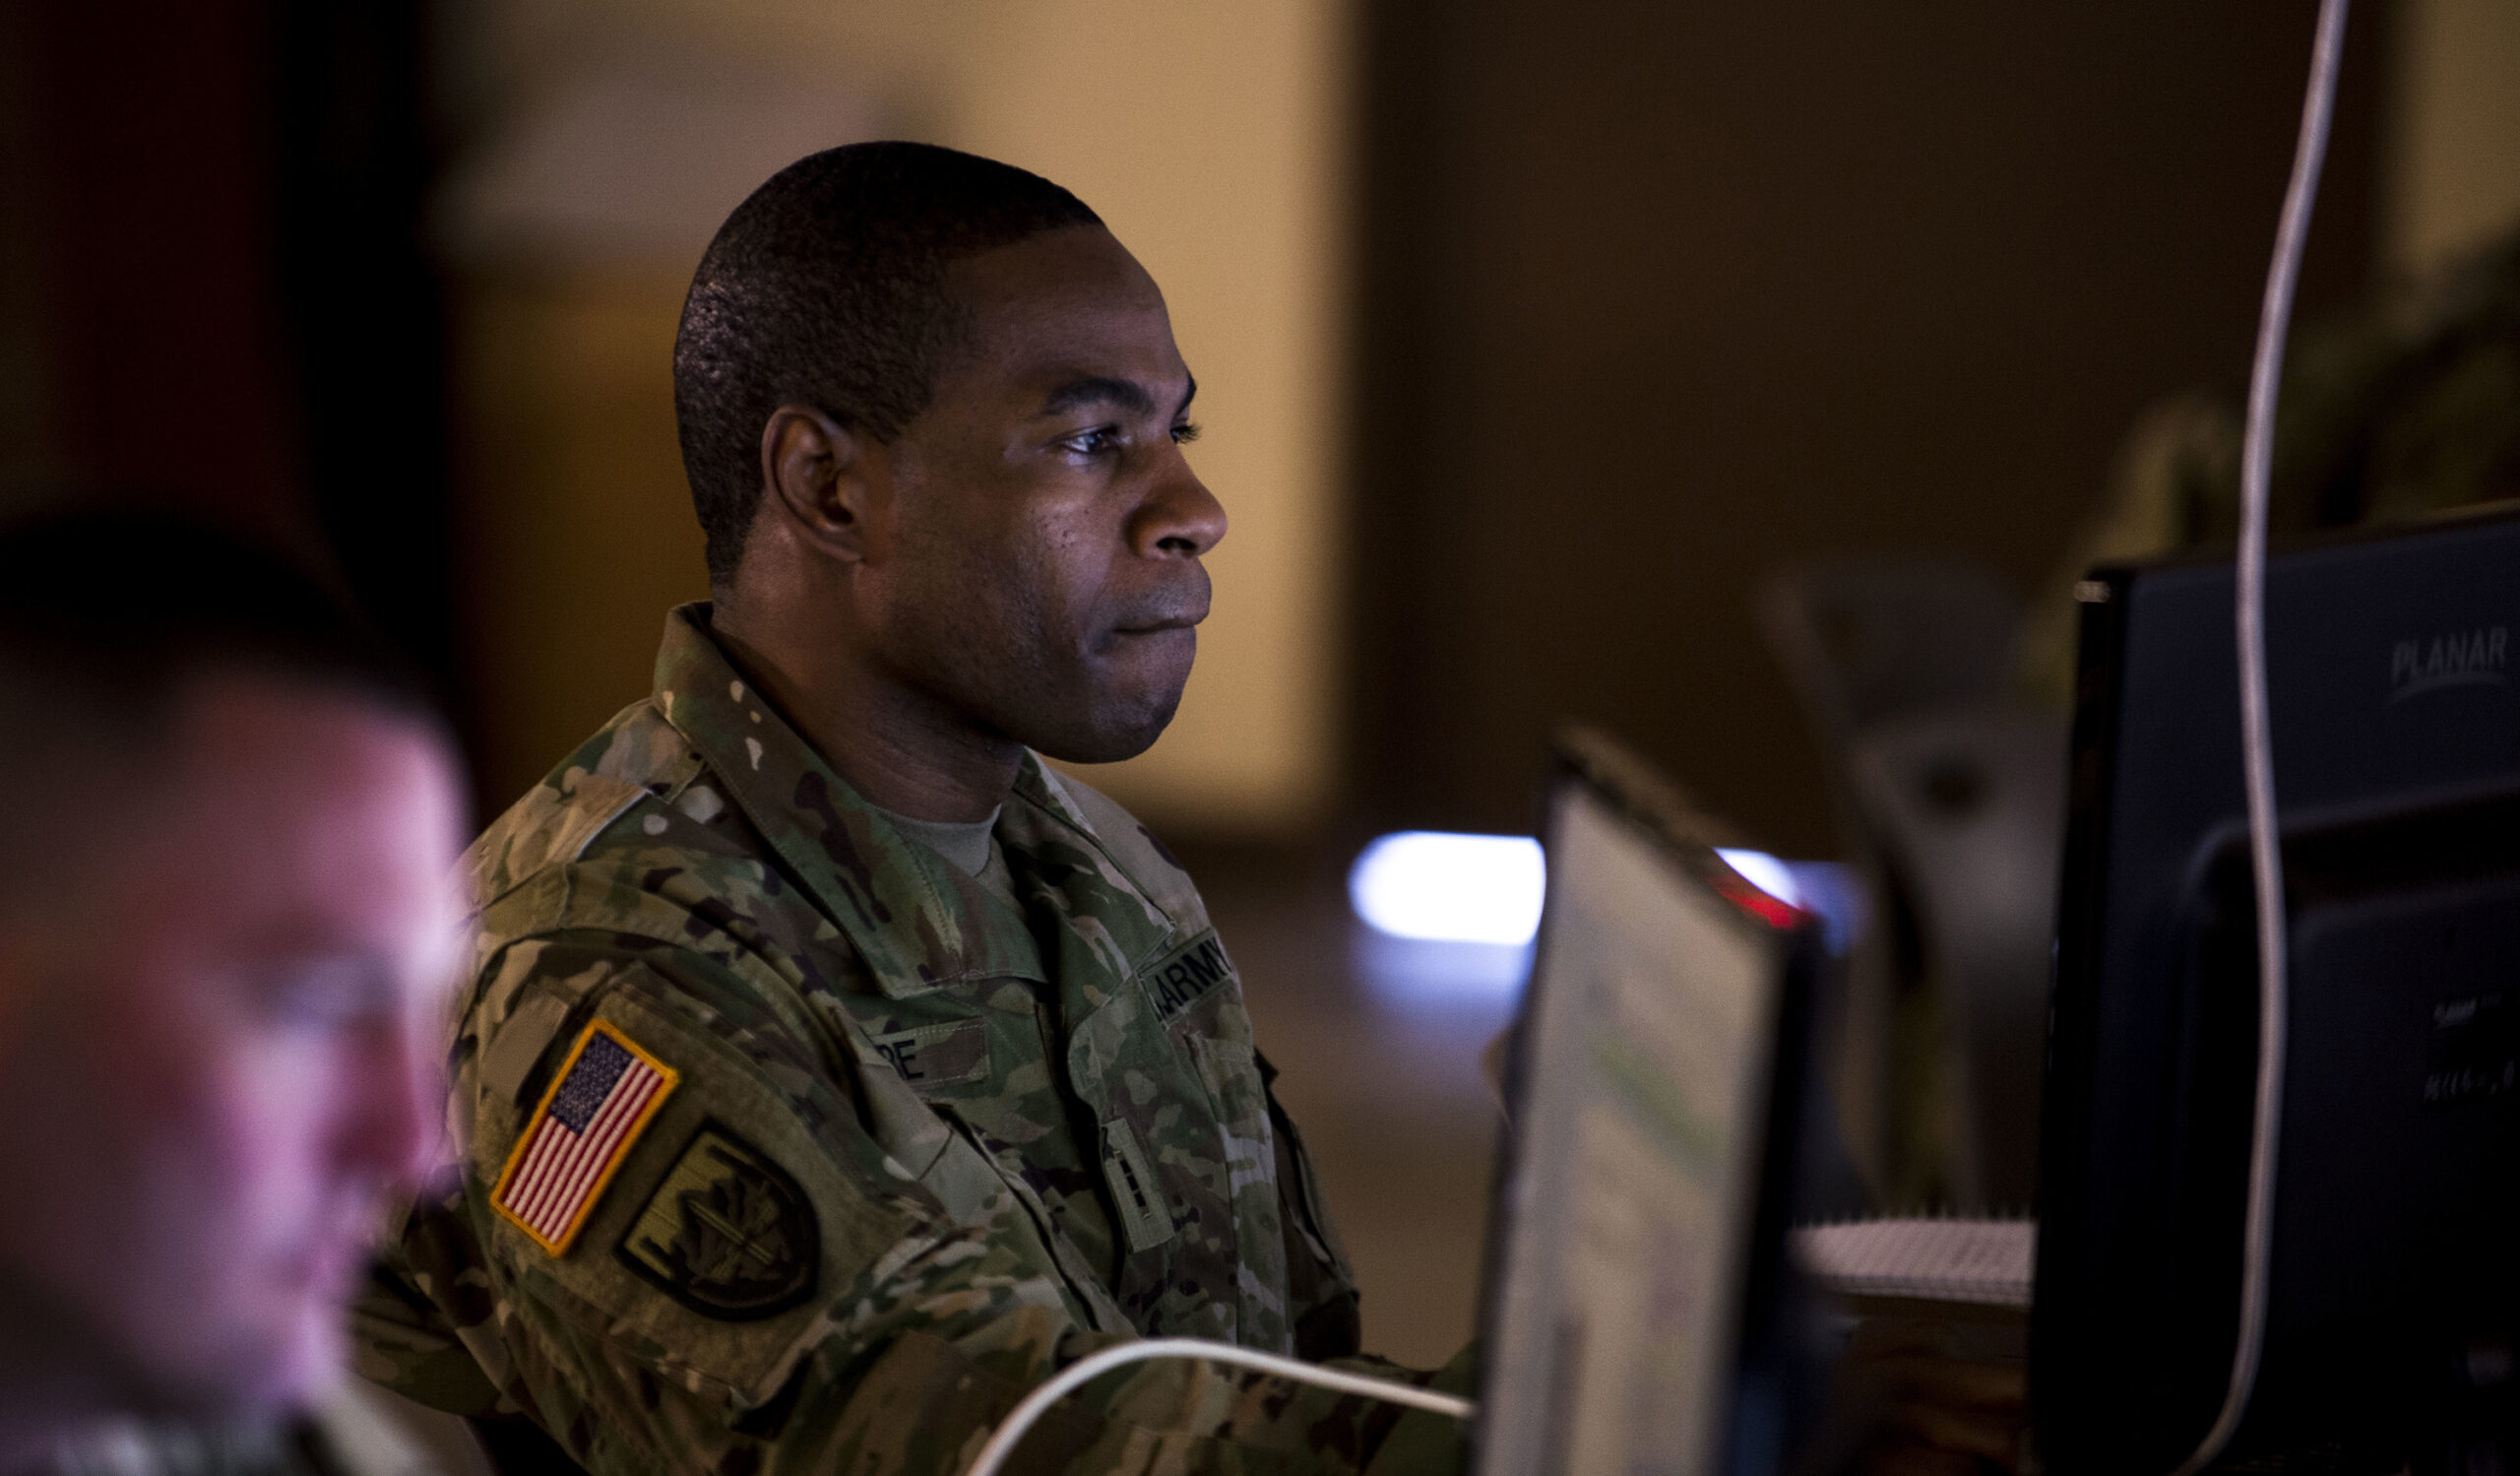 US Army Chief Warrant Officer studies course content during the training week of Cyber Shield 18 at Camp Atterbury Indiana, 2018